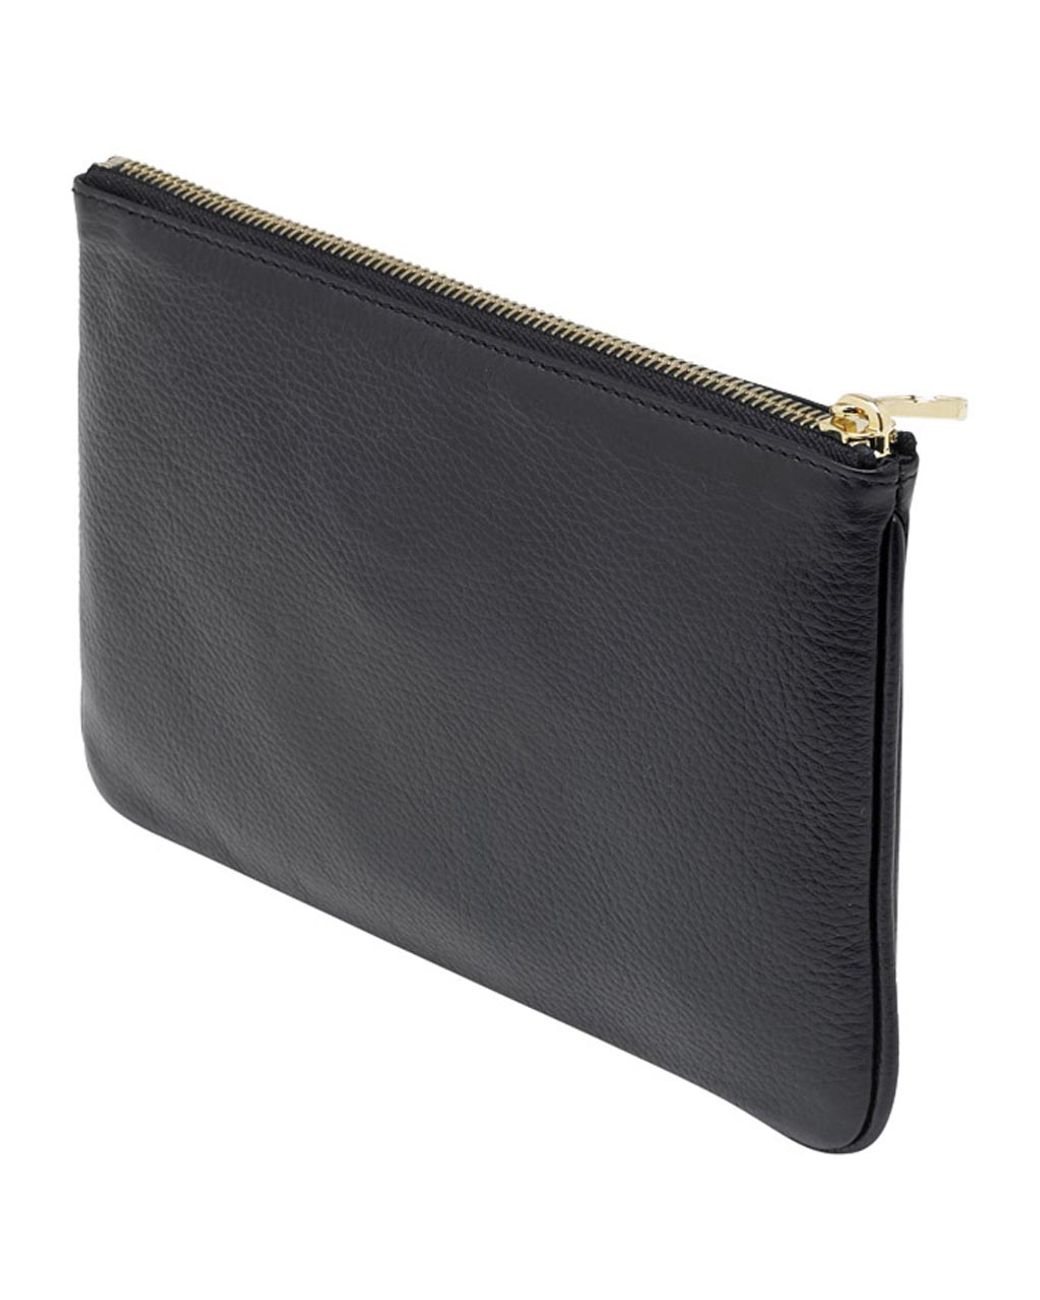 Mulberry Daria Pouch in Black | Lyst UK